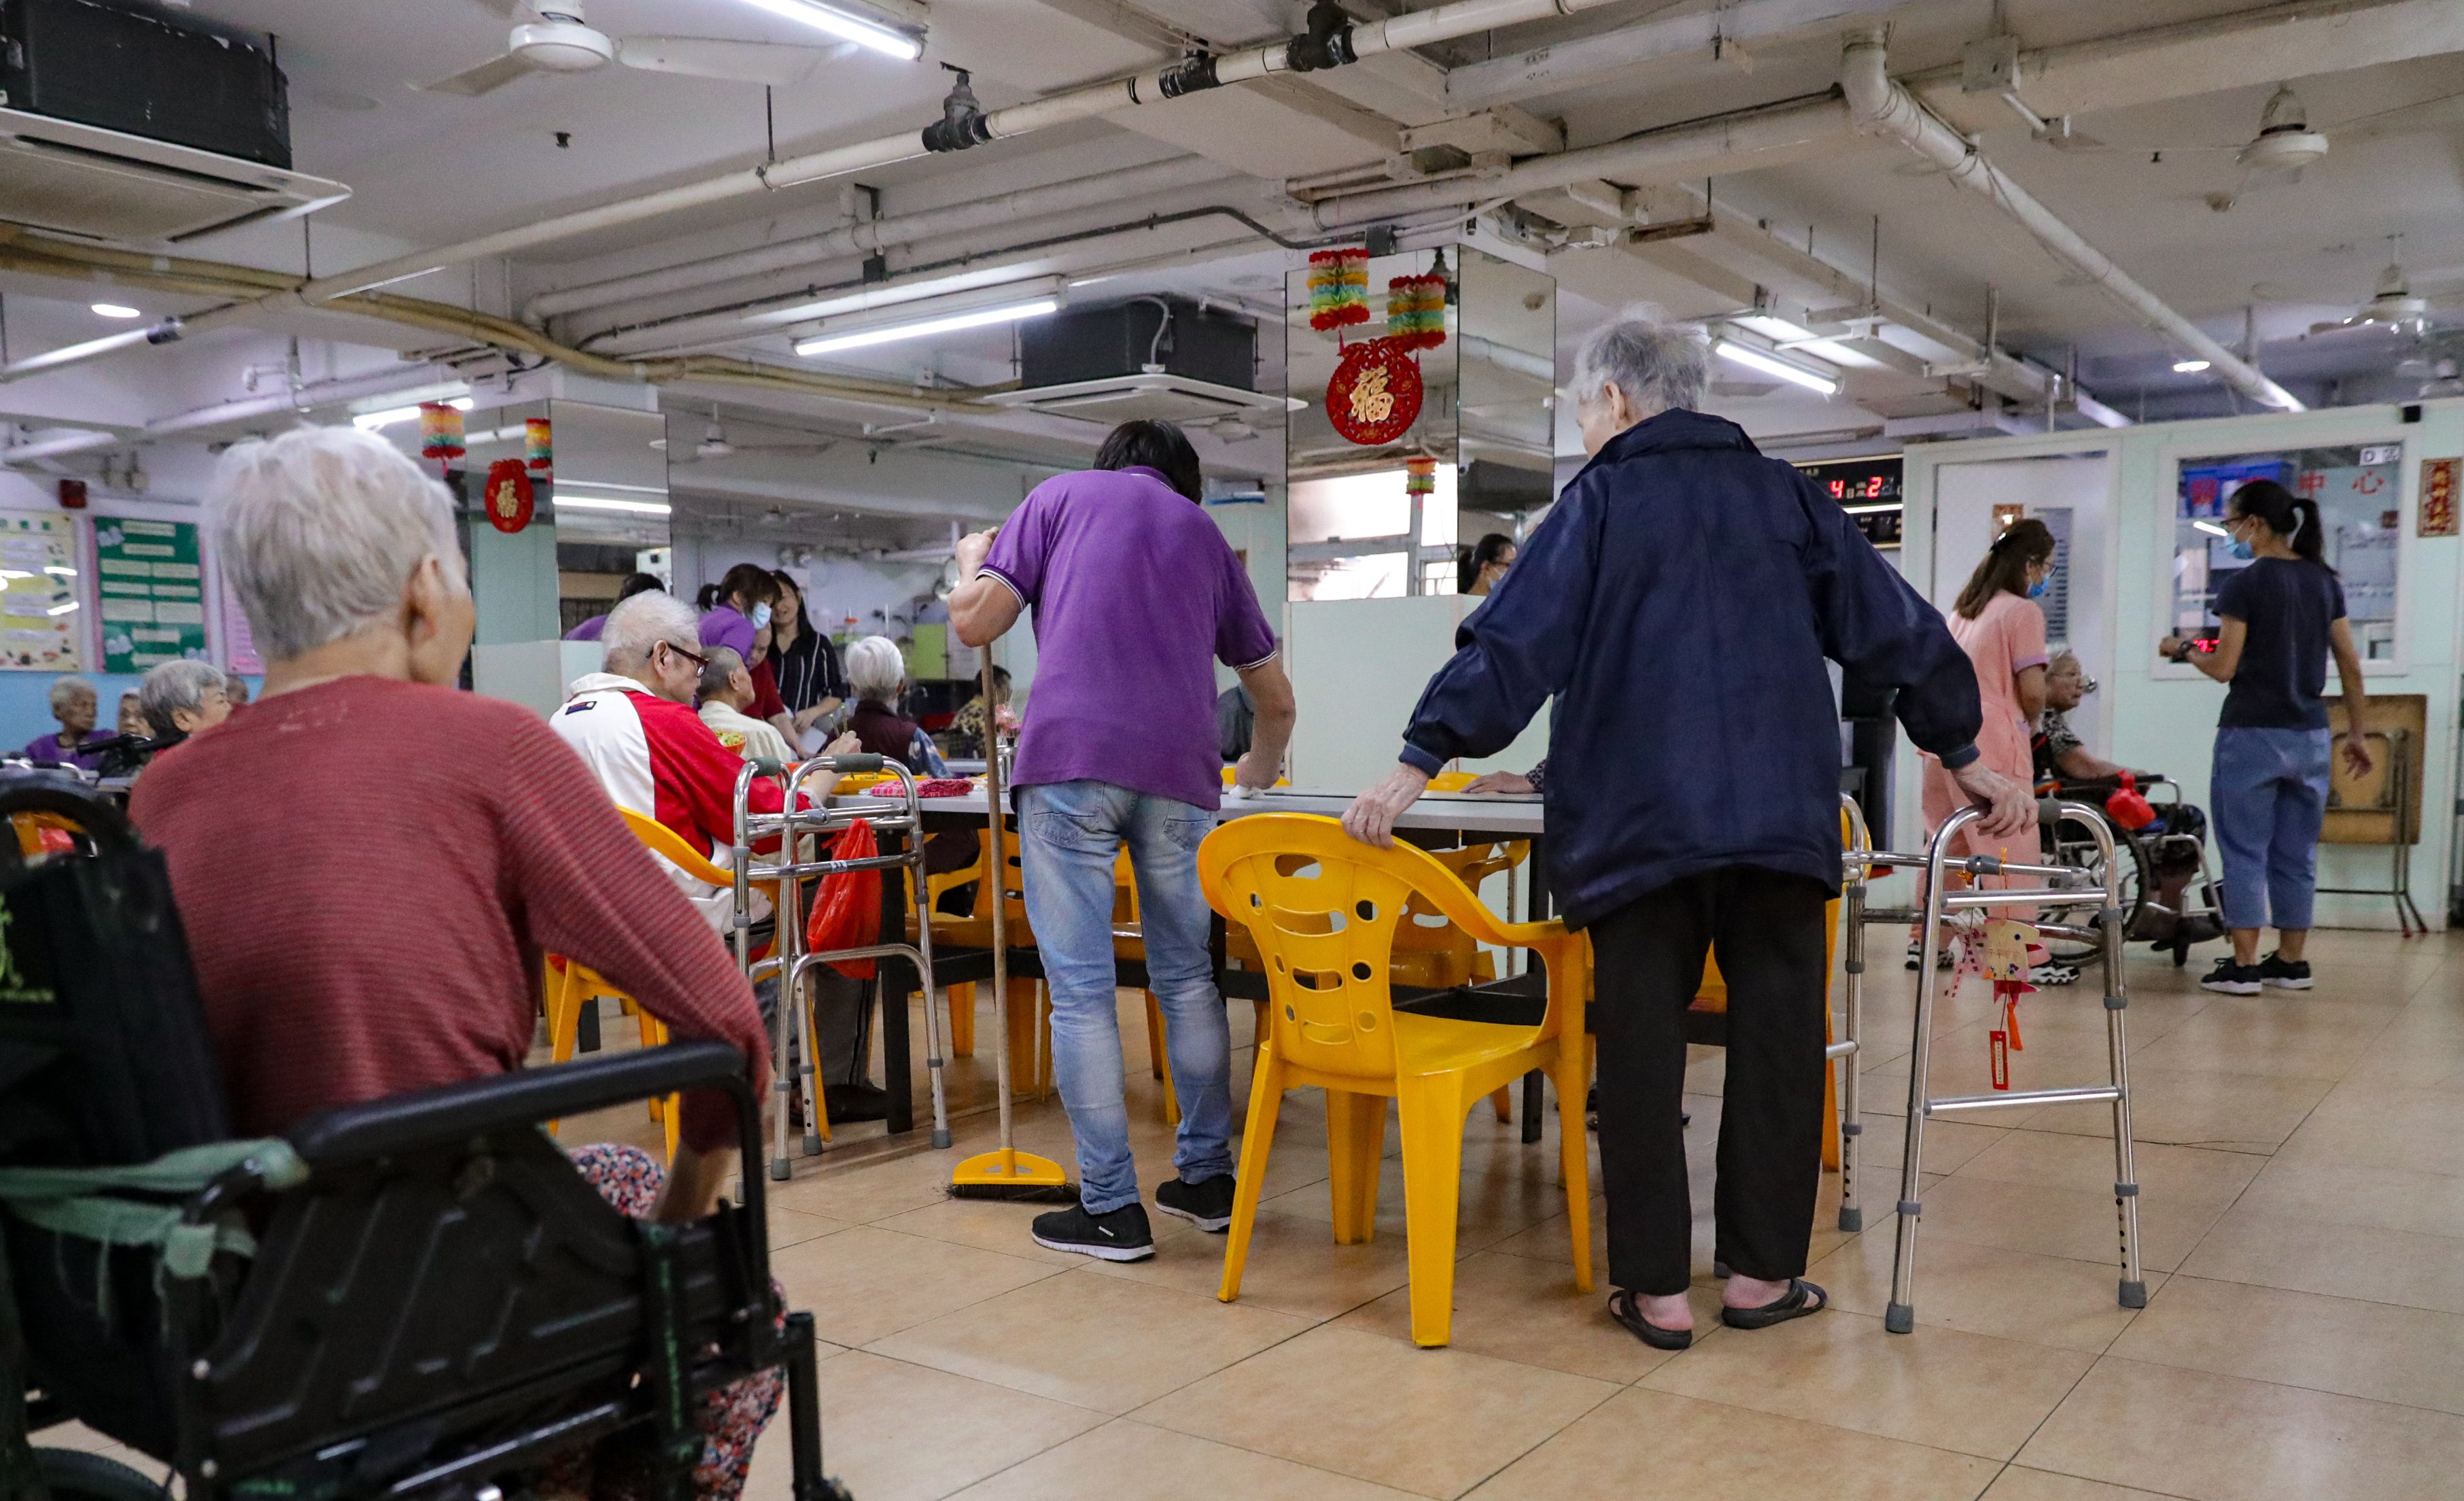 The Consumer Council also urged the government to raise labour importation quotas for carers. Photo: Edmond So